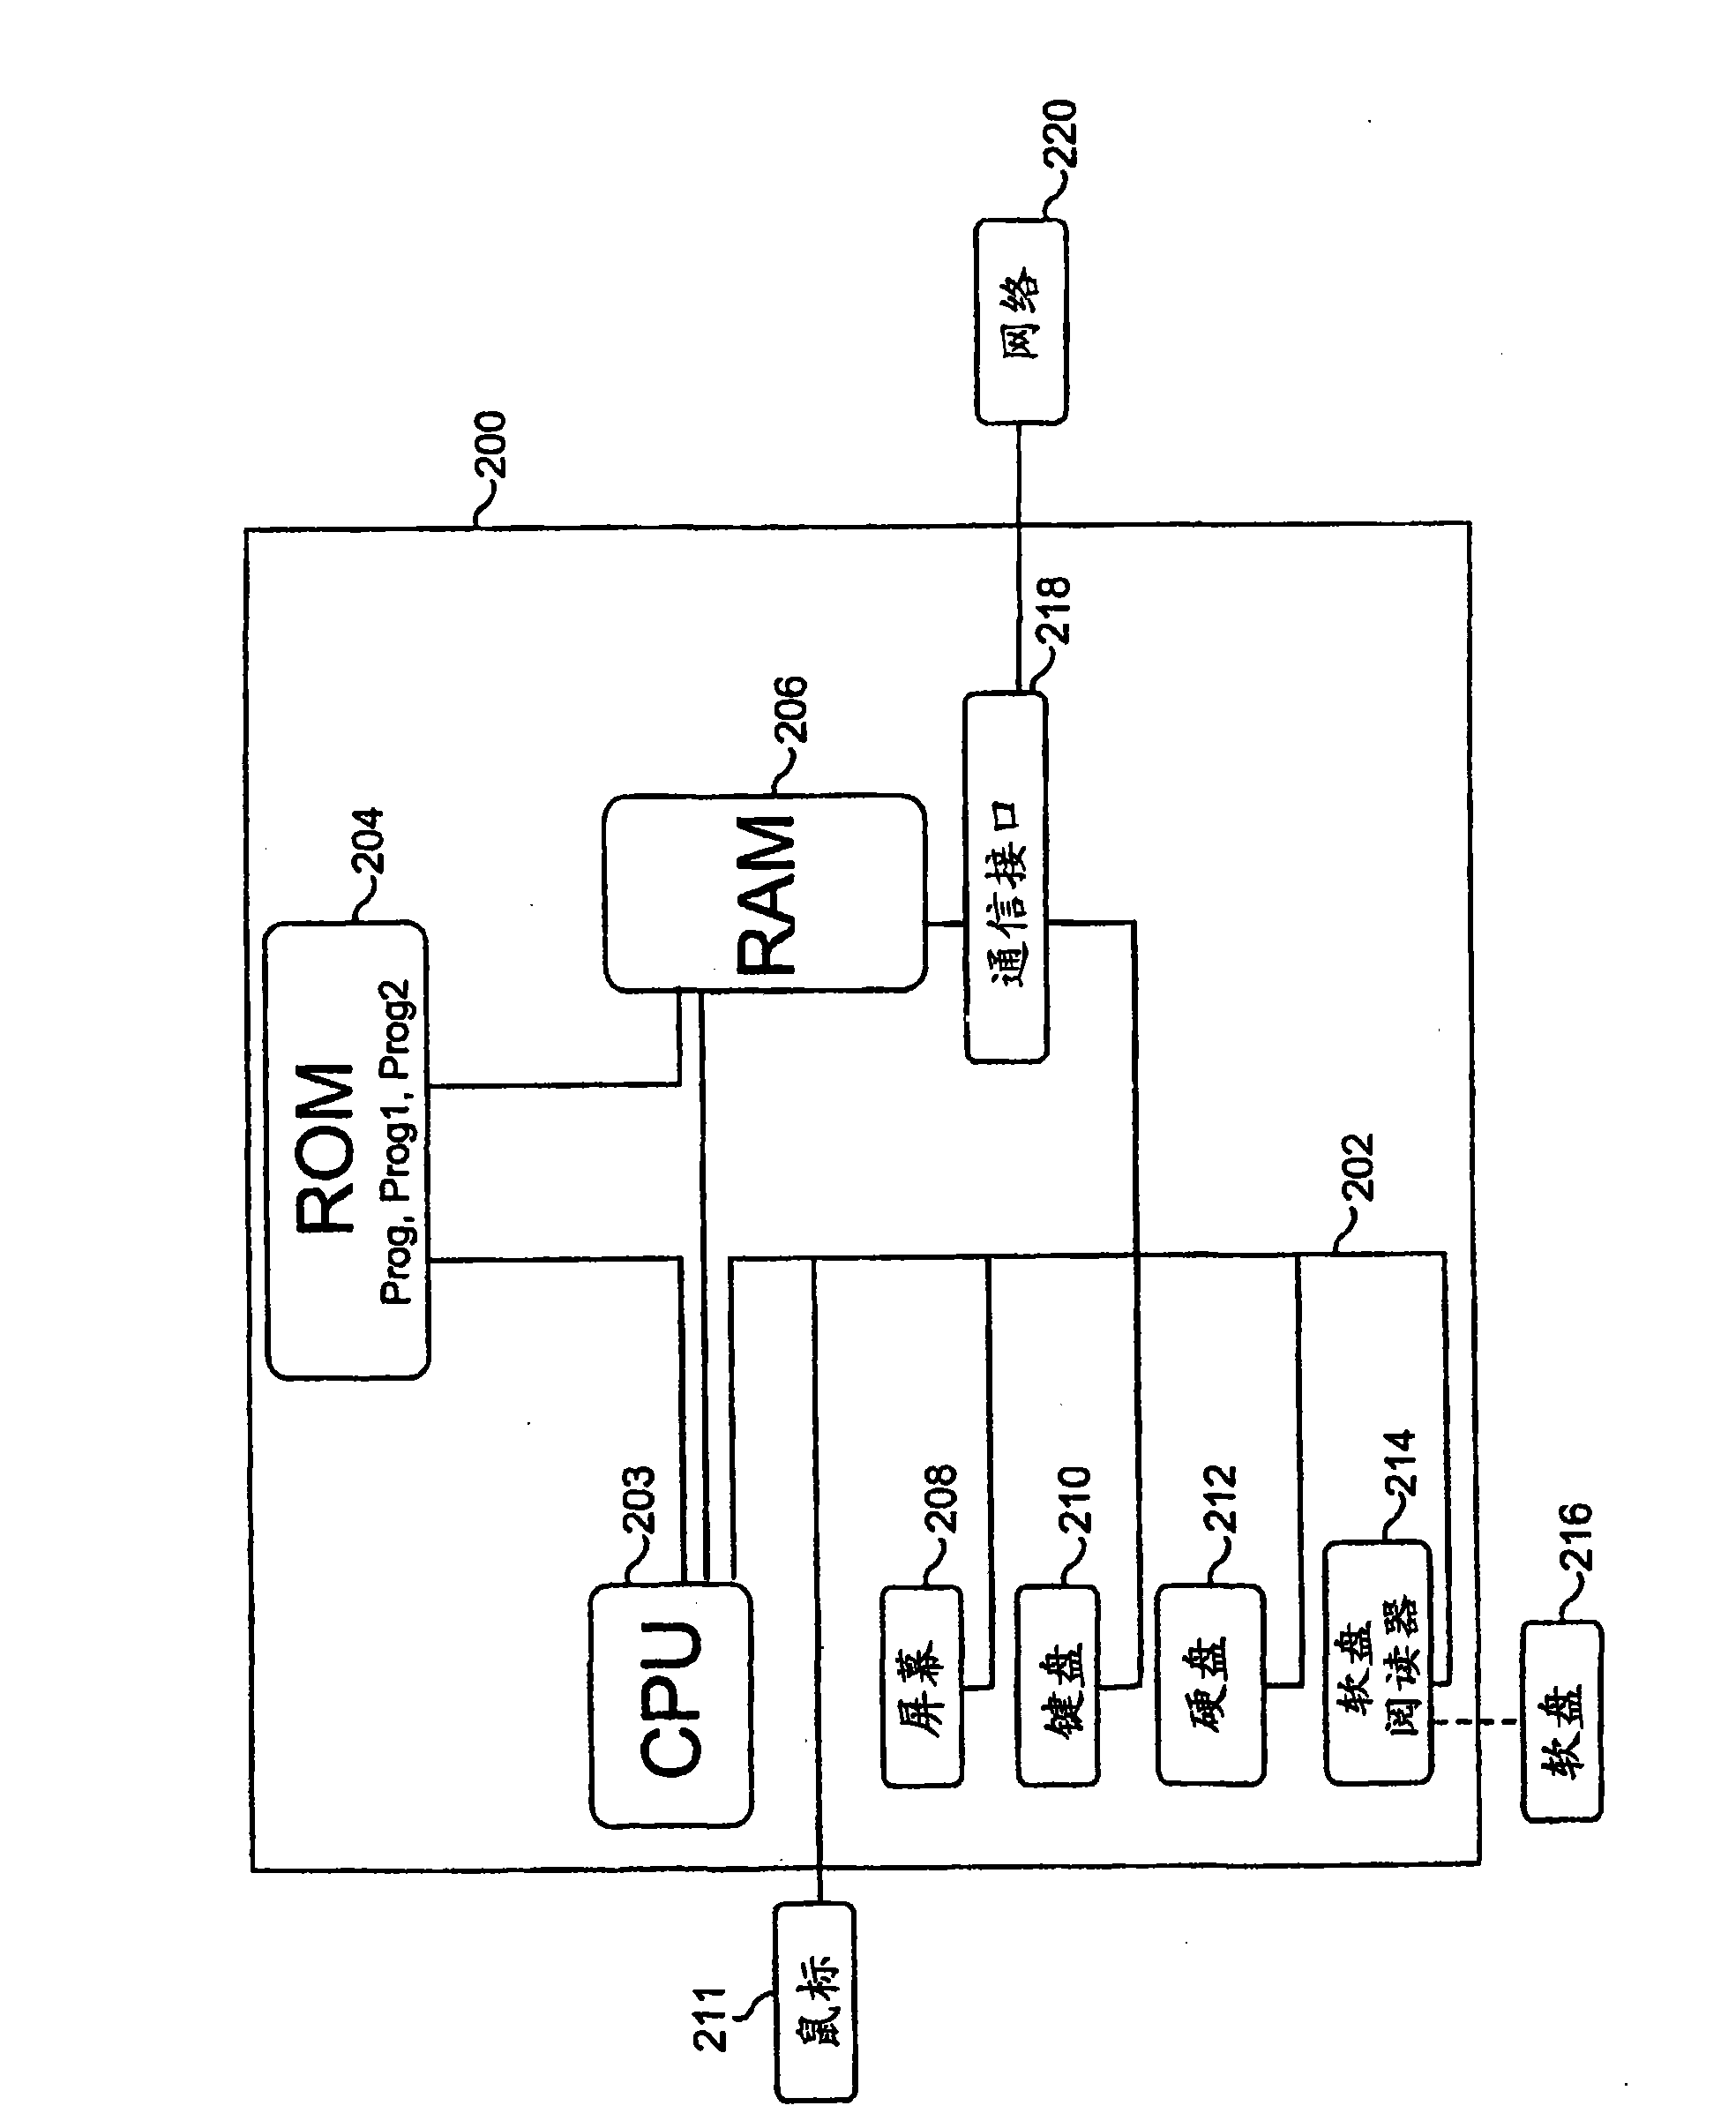 Method and device for managing communication channels for data exchange from an aircraft